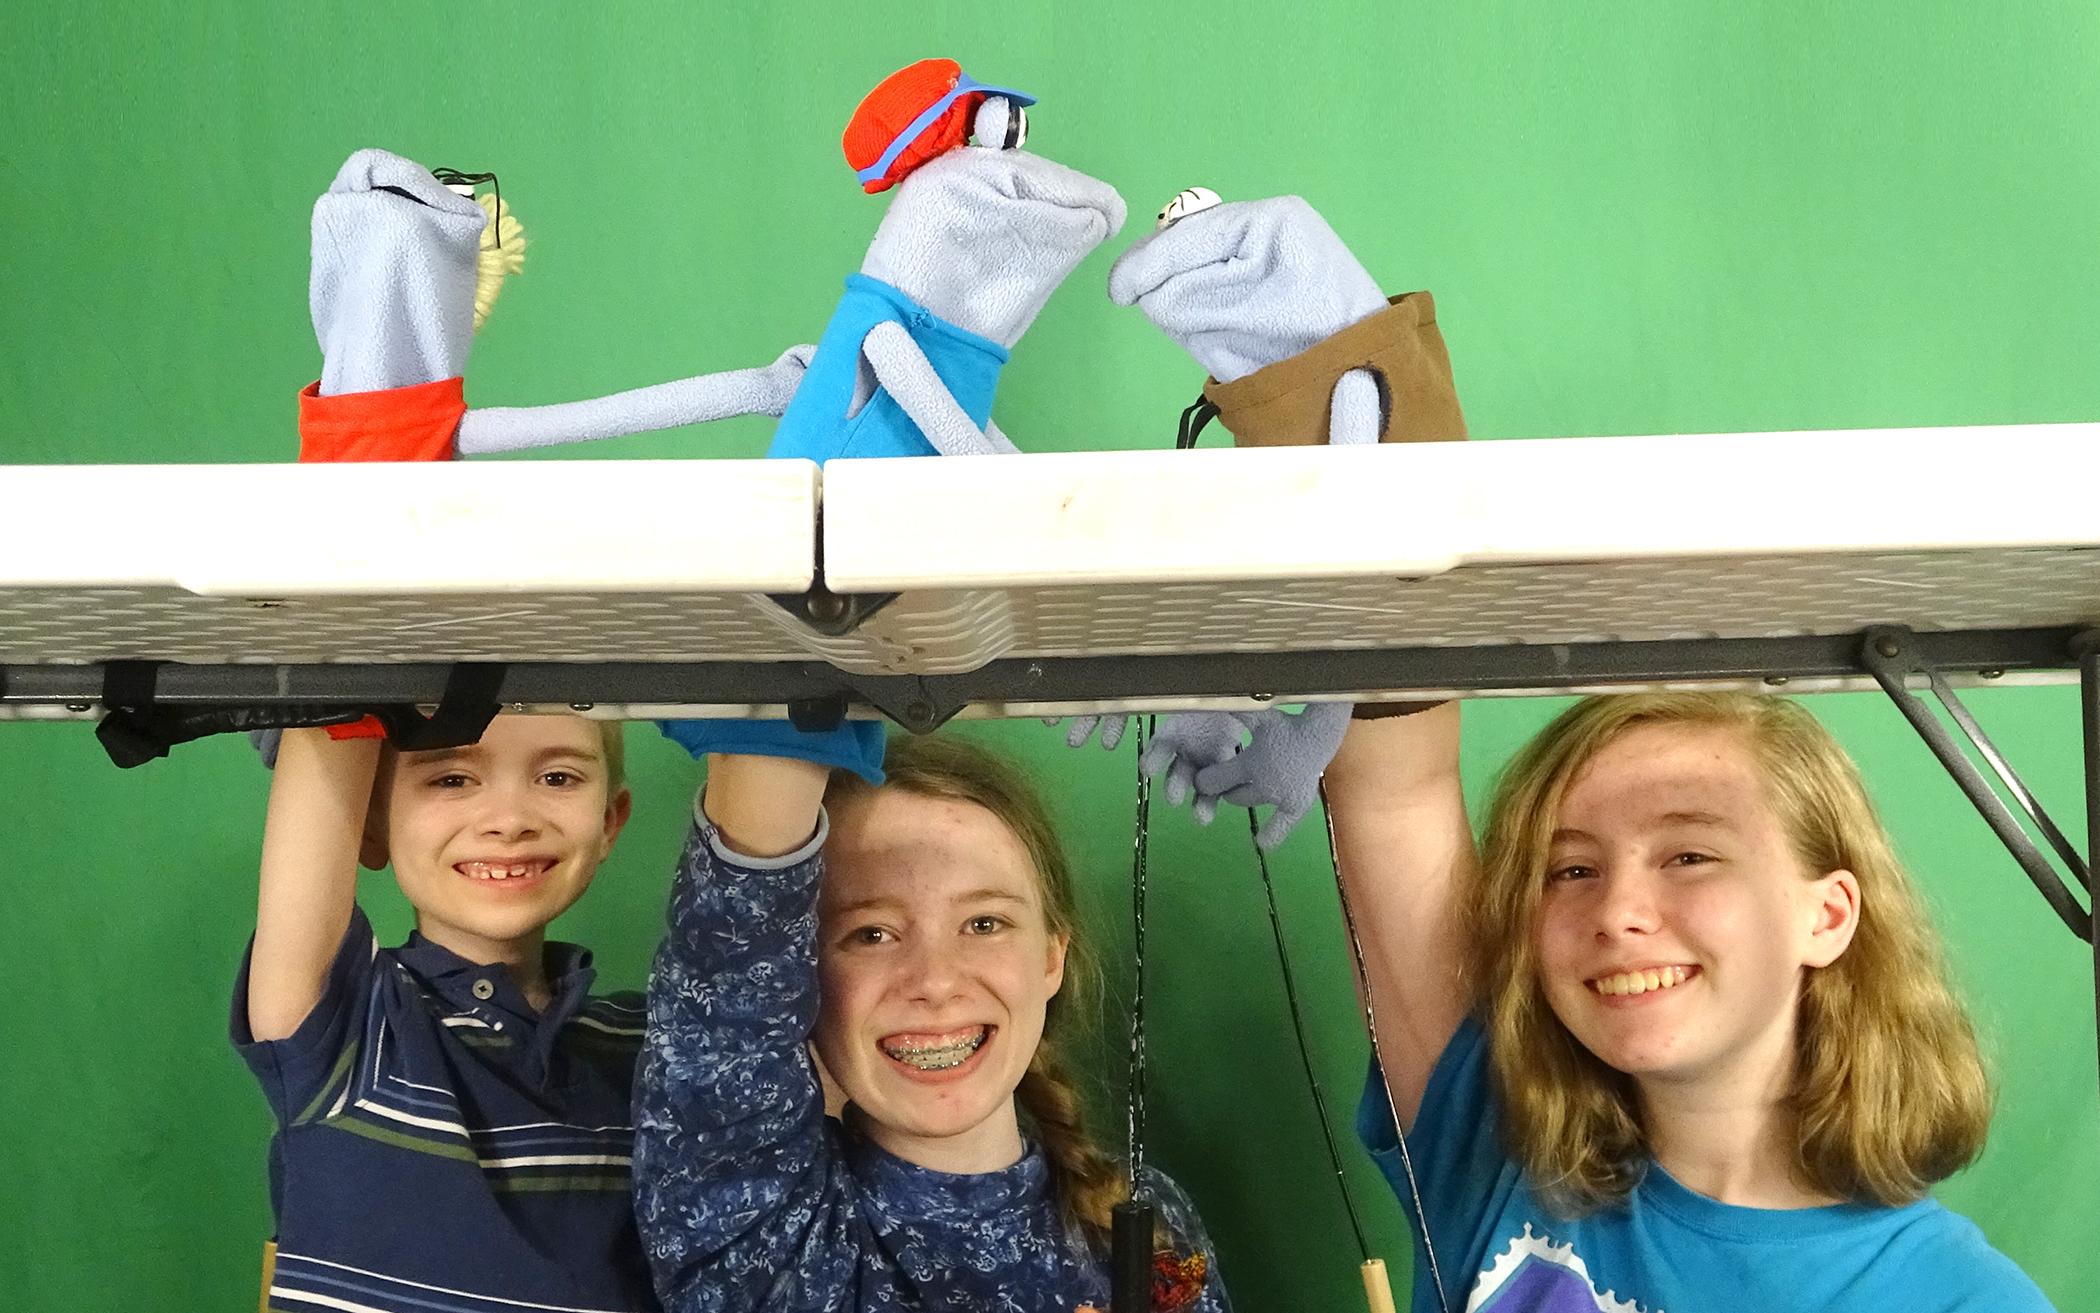 See a video about the Gutscher family puppets at KidsCorner.com/kids-in-action.